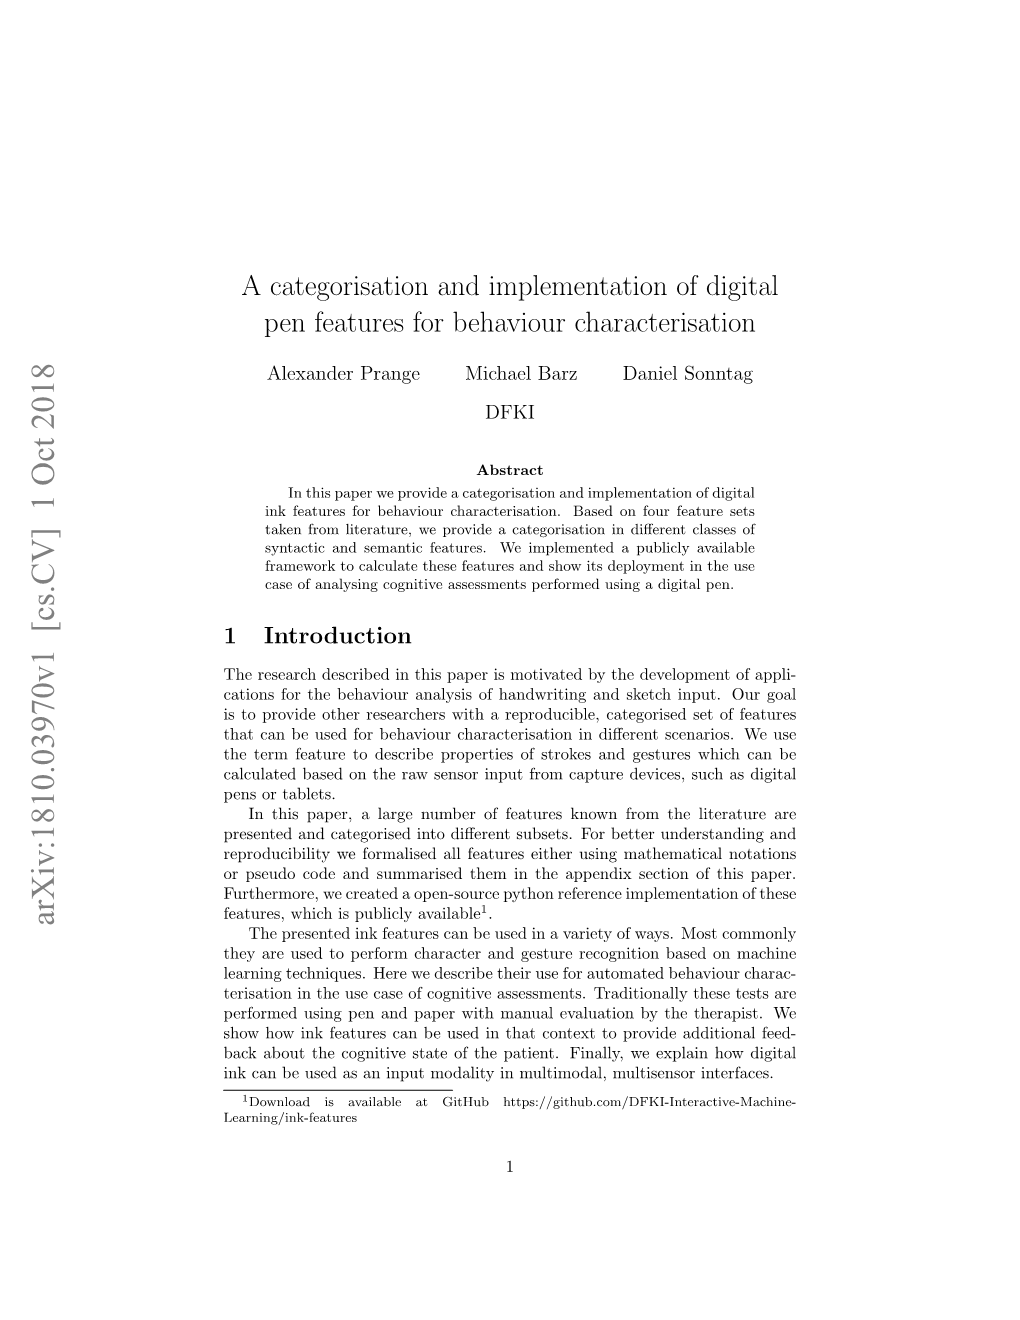 A Categorisation and Implementation of Digital Pen Features for Behaviour Characterisation